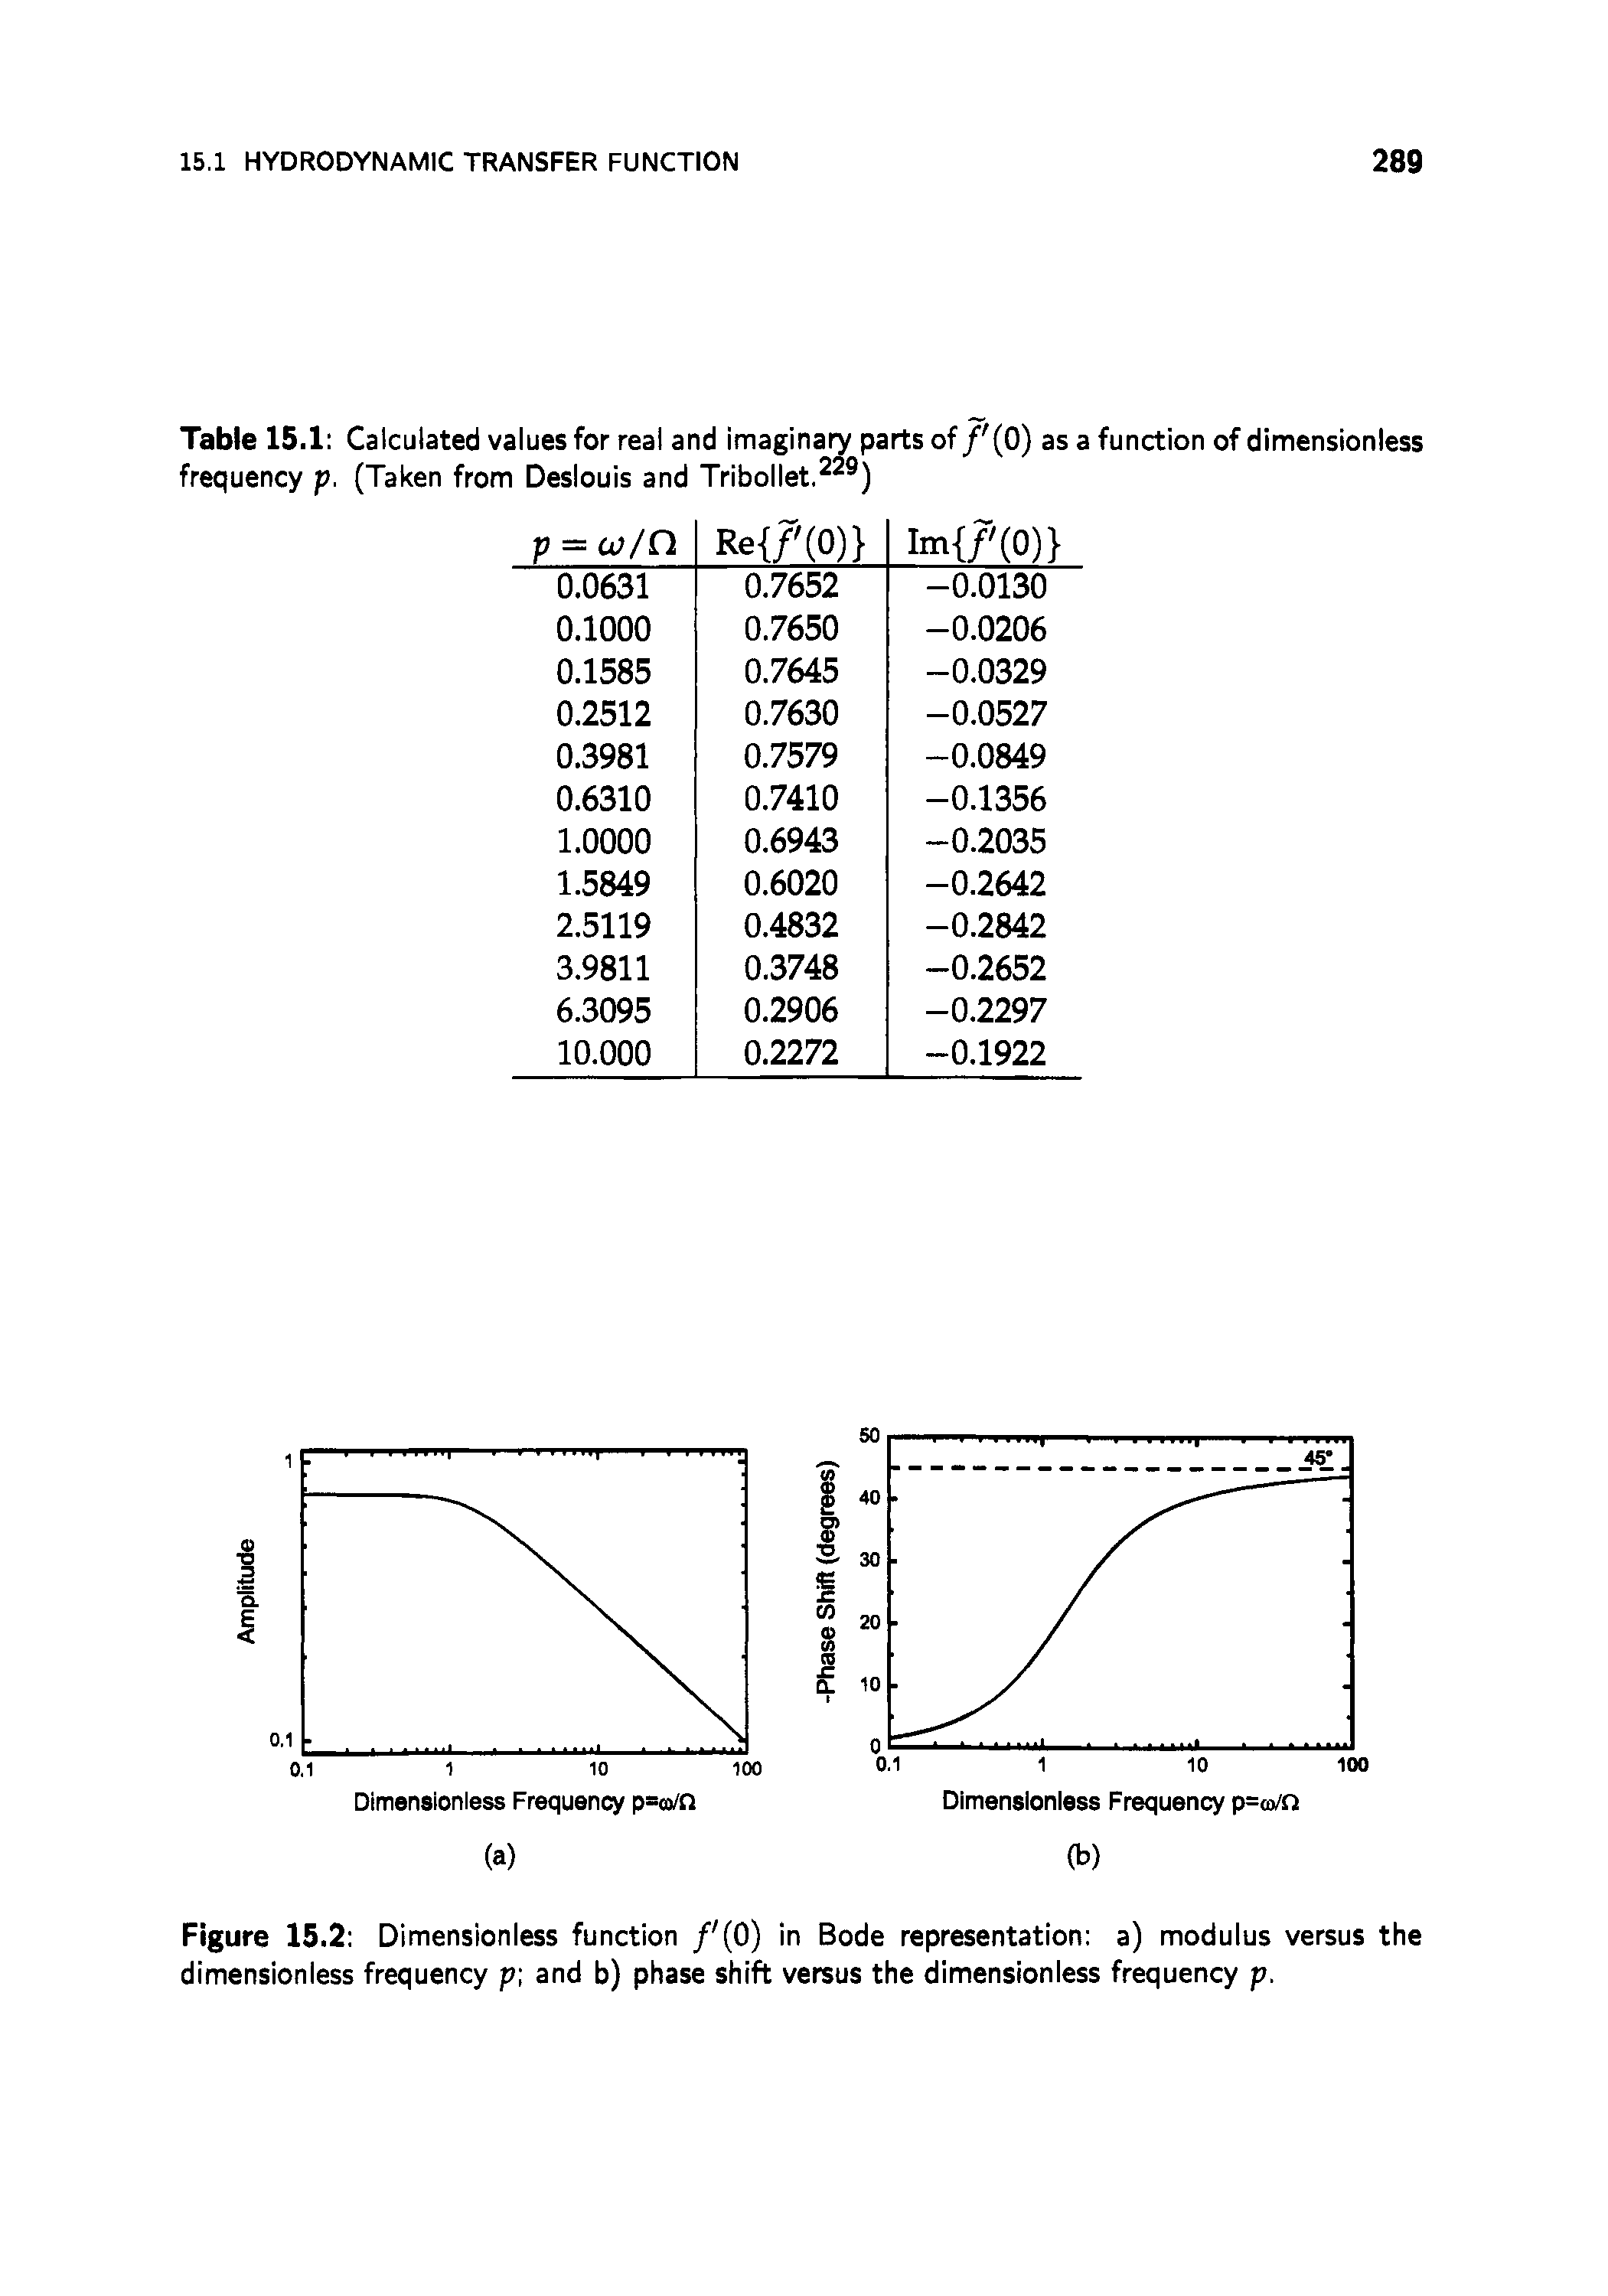 Figure 15.2 Dimensionless function f 0) in Bode representation a) modulus versus the dimensionless frequency p and b) phase shift versus the dimensionless frequency p.